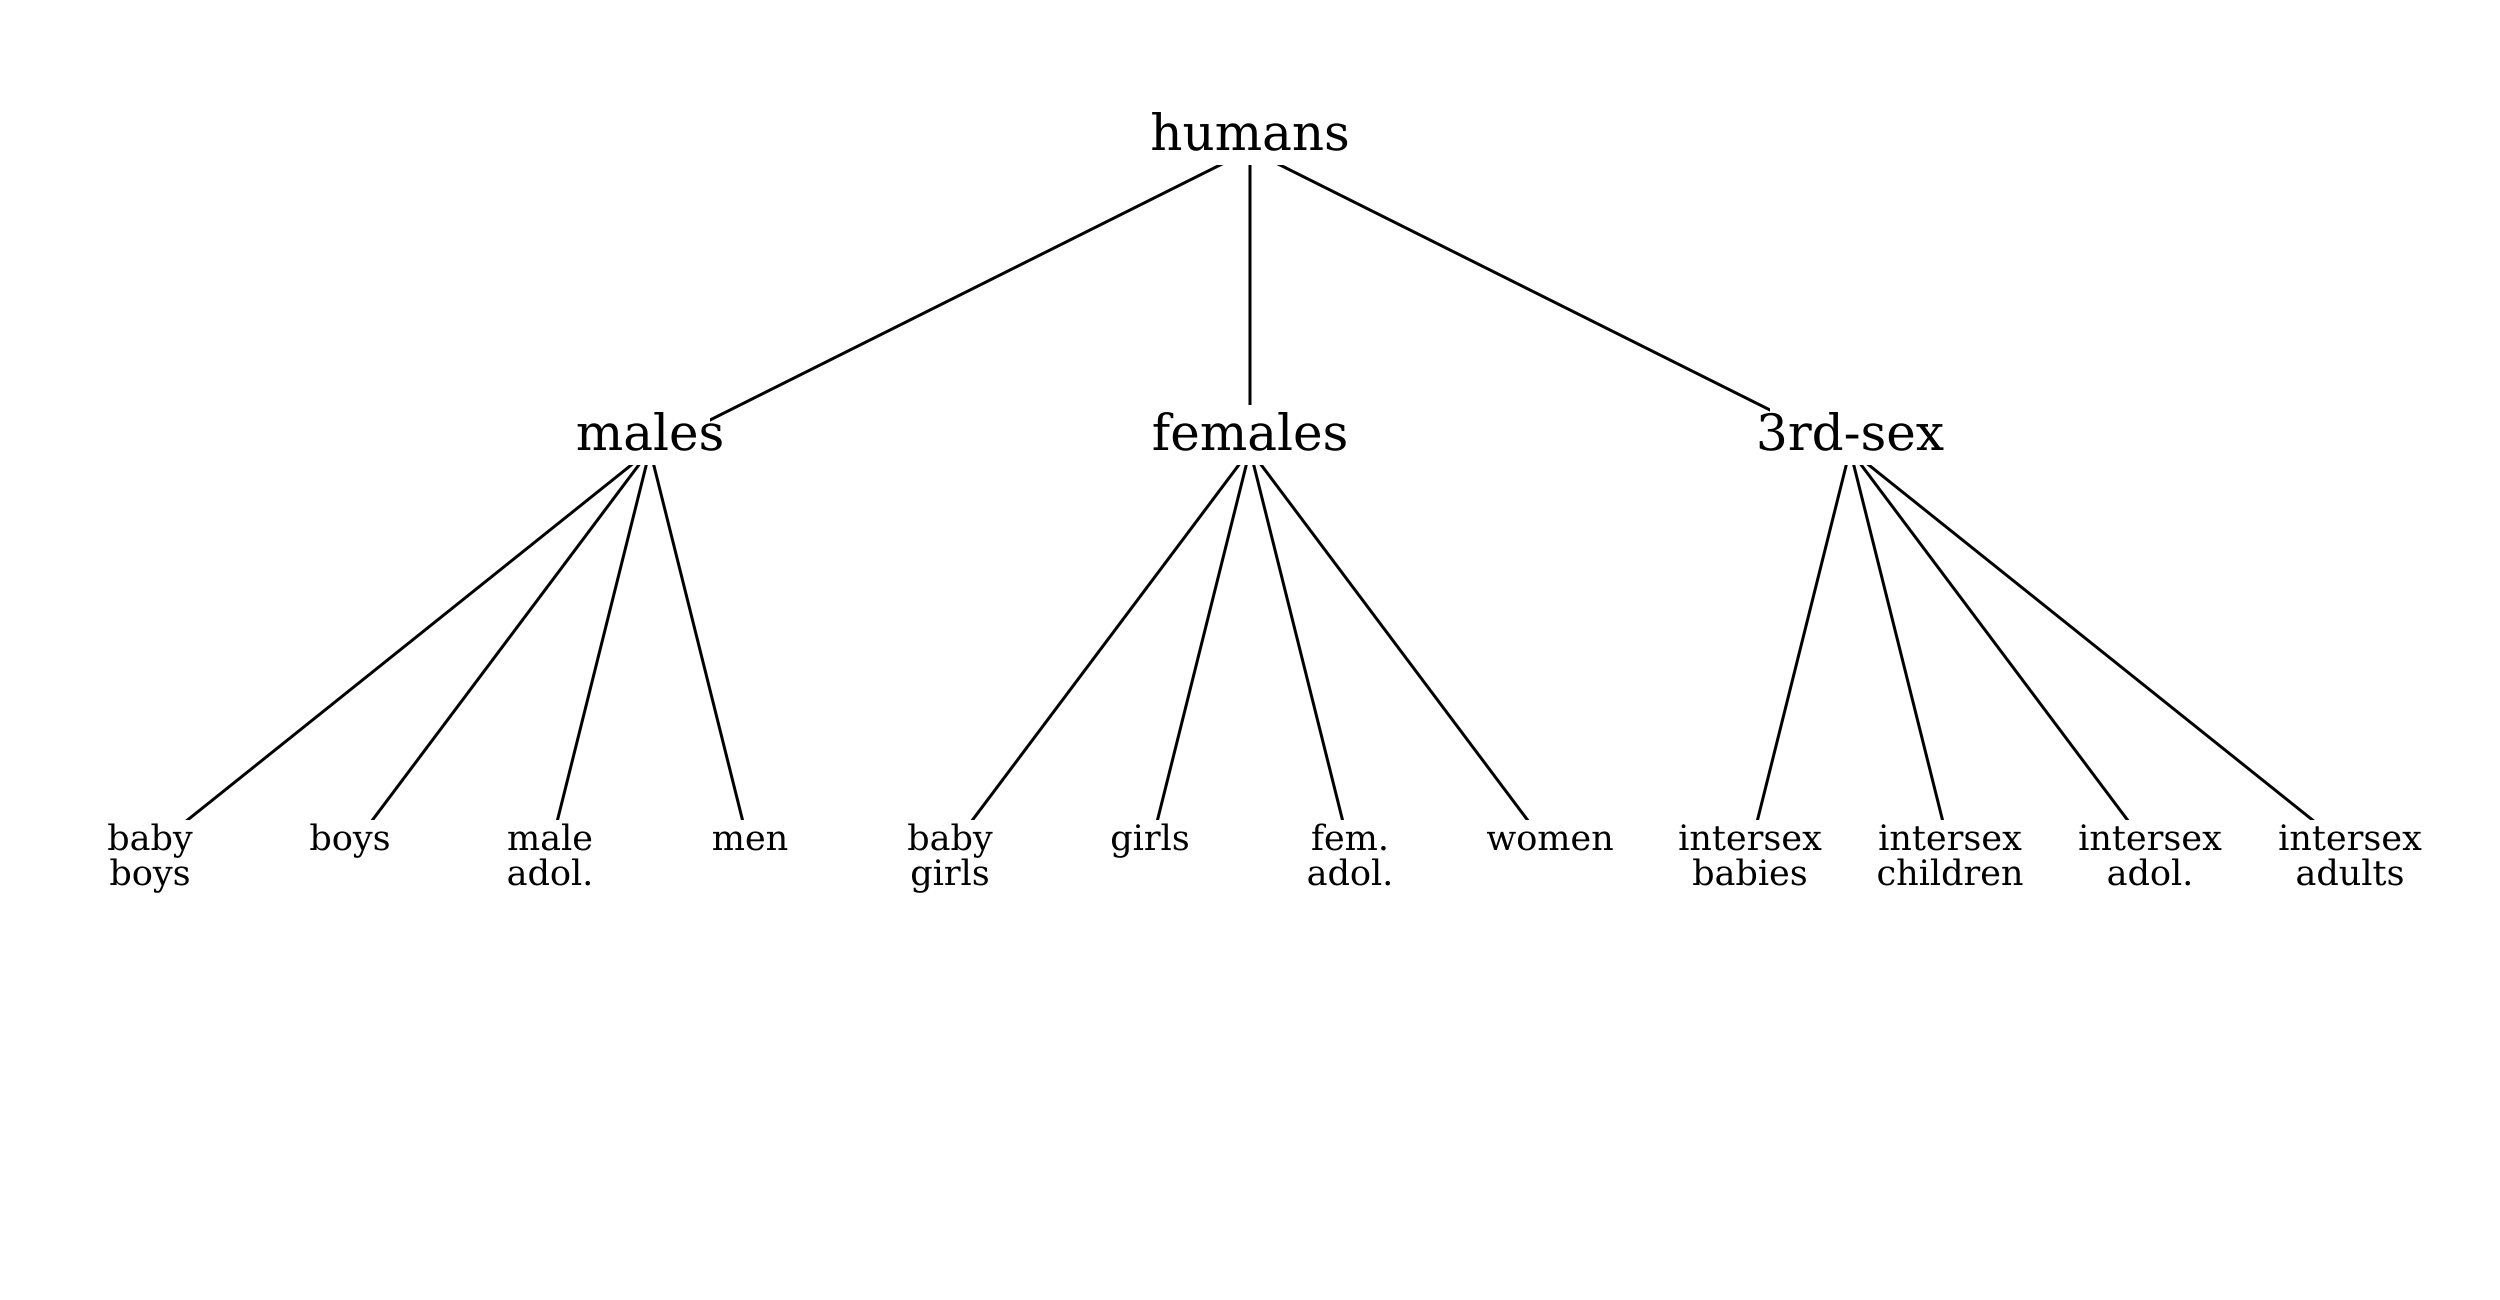 A tree diagram showing the category of humans subdivided into males, females, and 3rd-sex, with additional subdivisions by age.